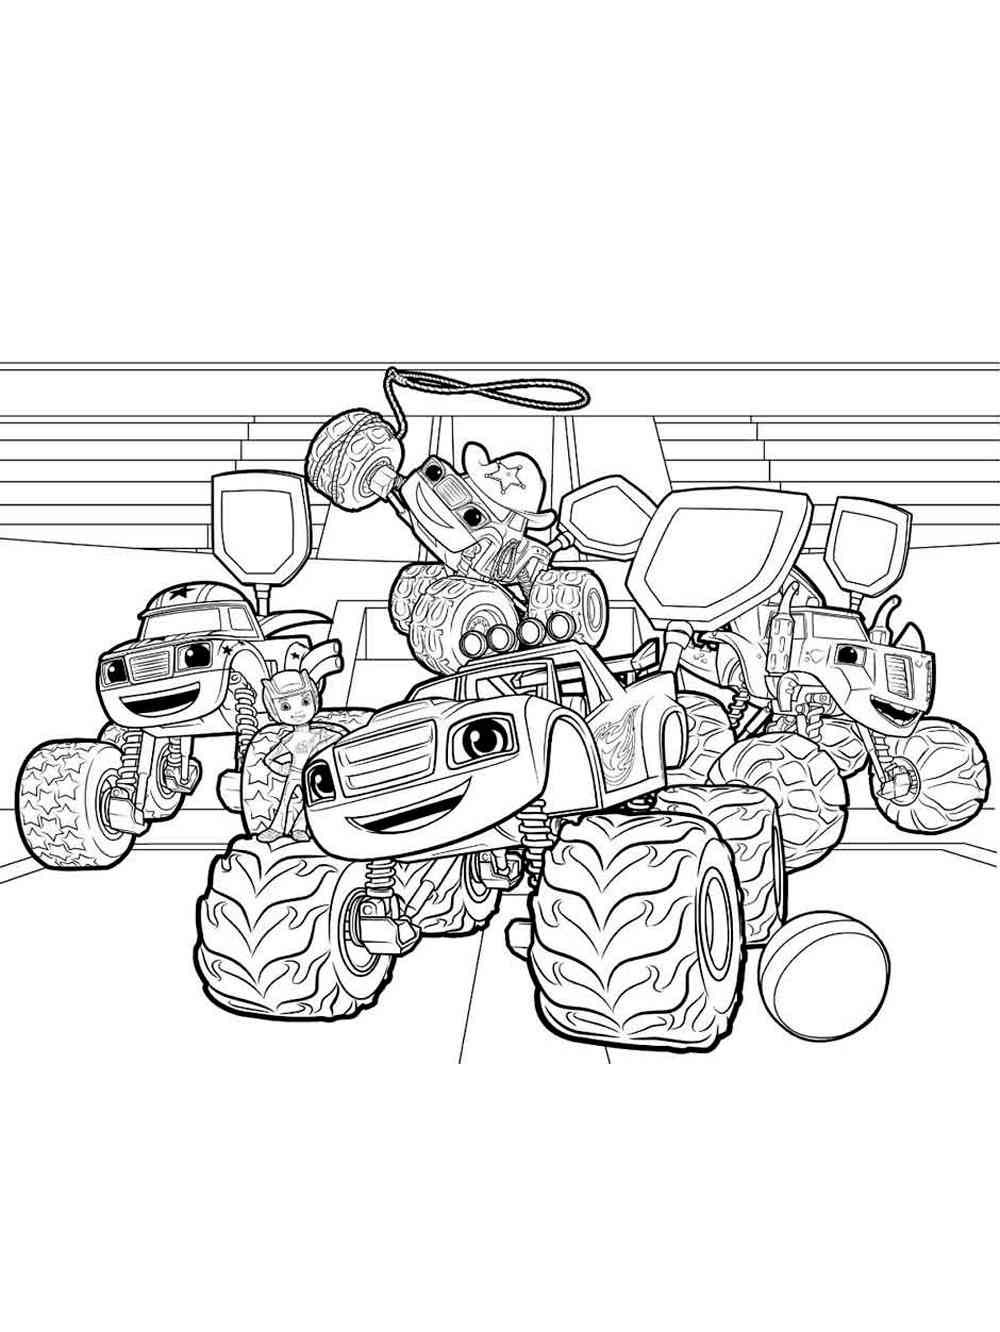 Blaze and the Monster Machines Characters coloring page